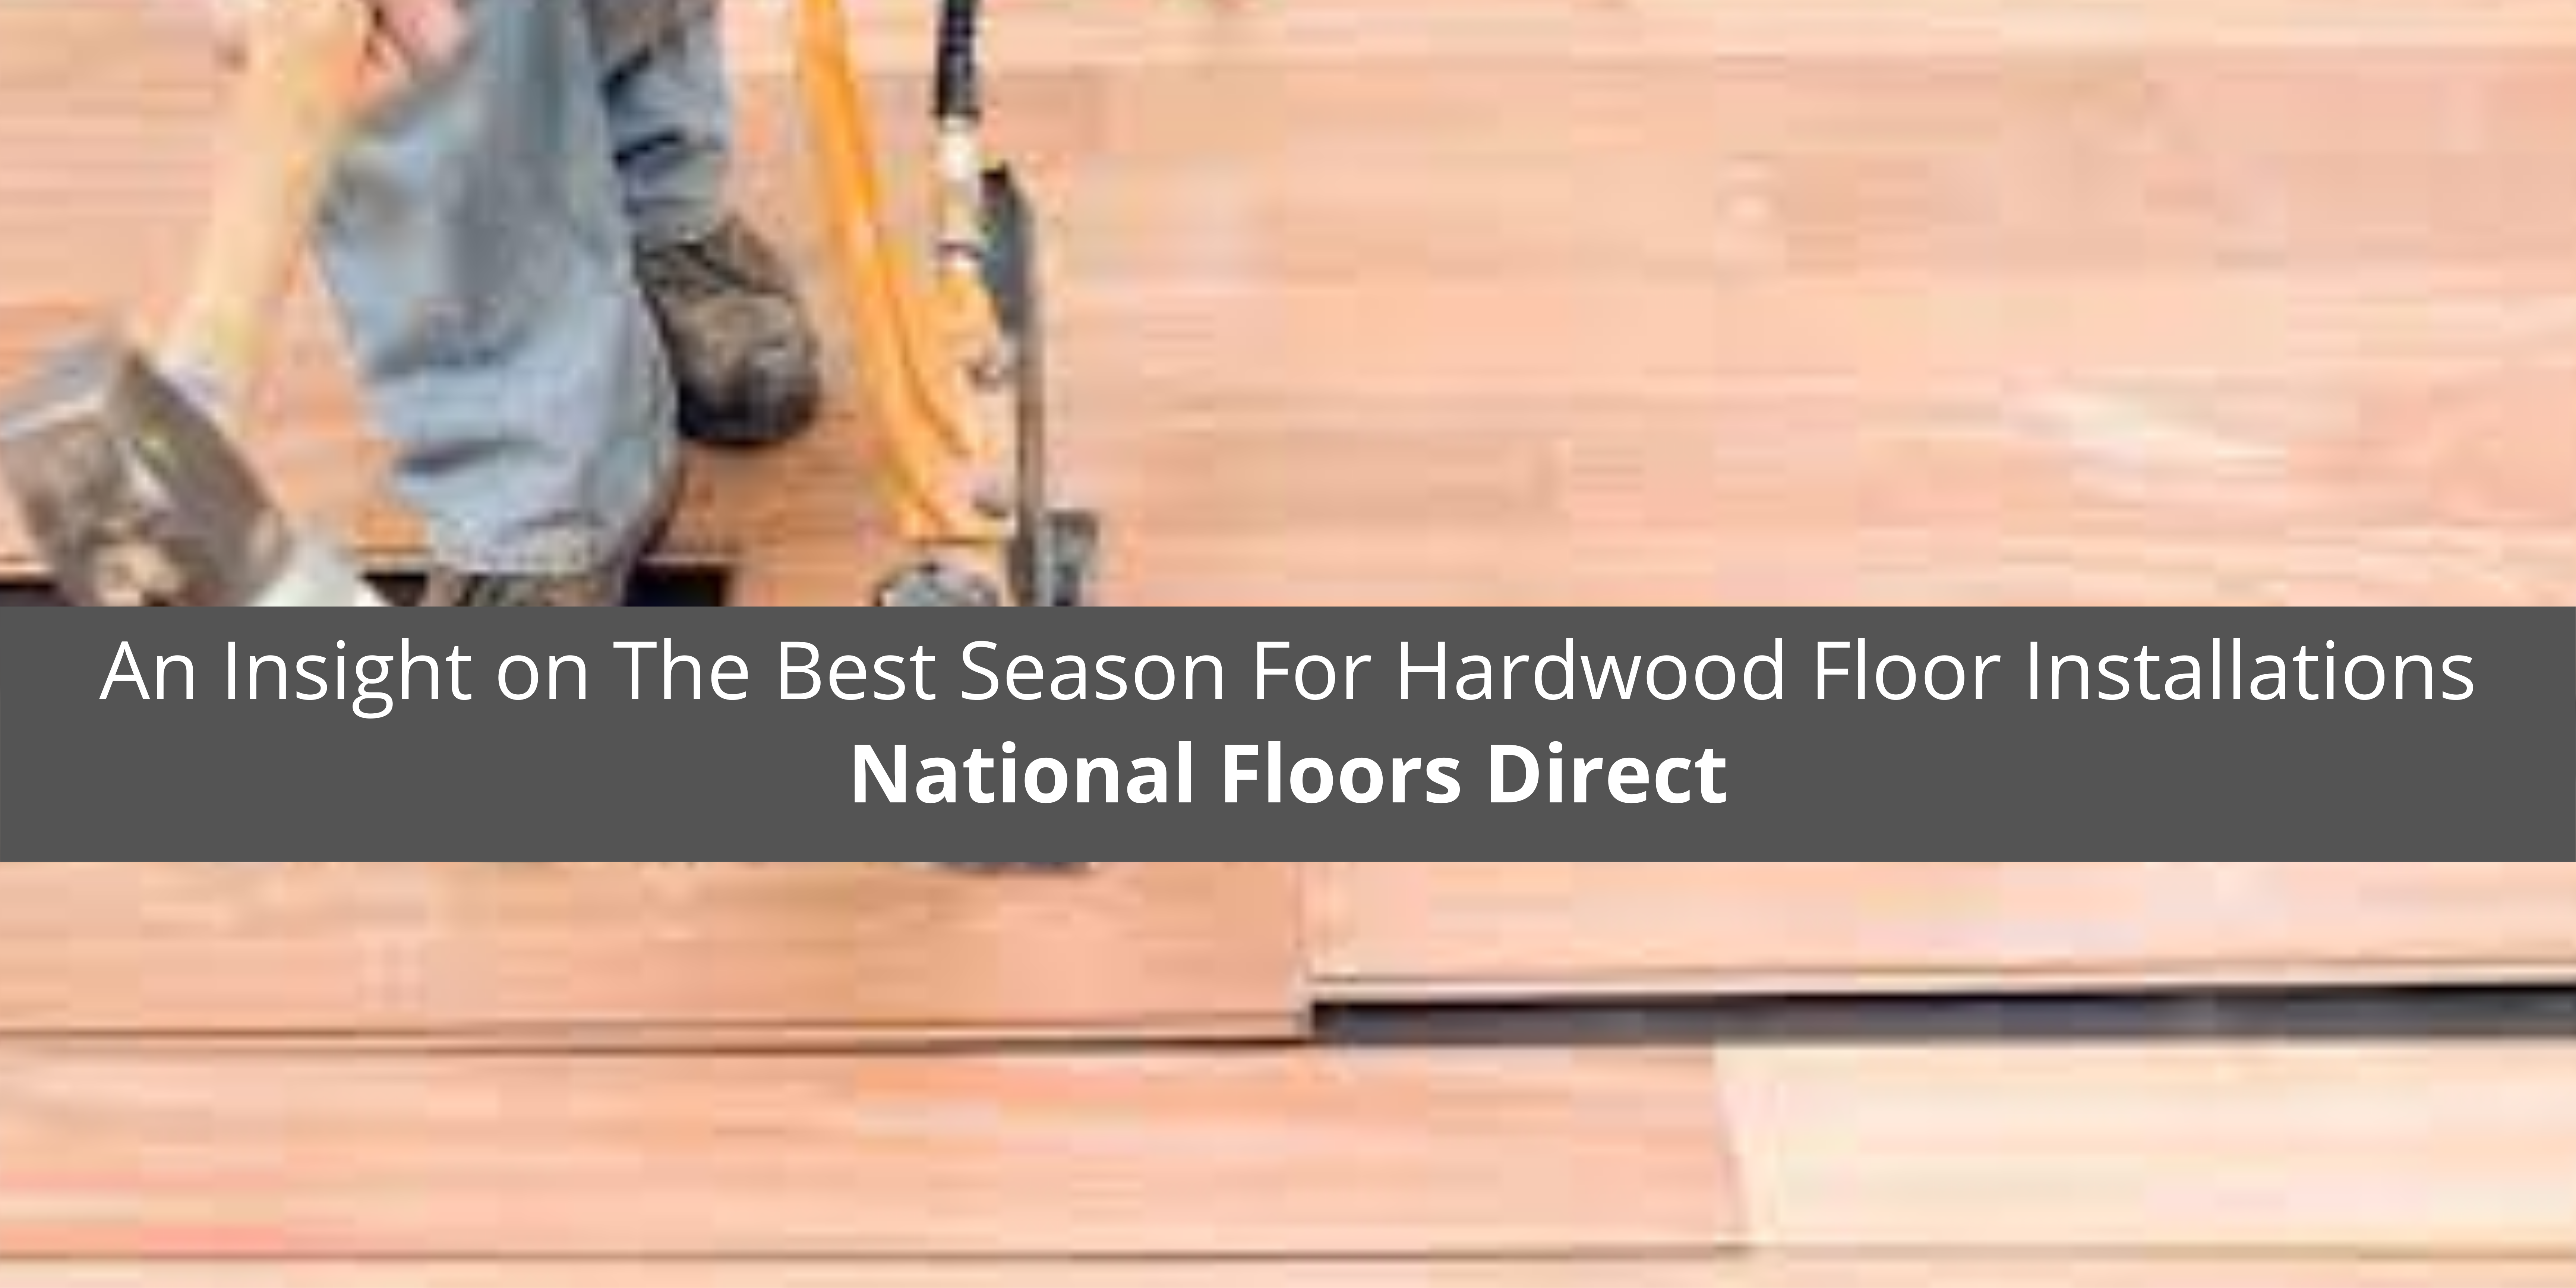 National Floors Direct Offers An Insight on The Best Season For Hardwood Floor Installations